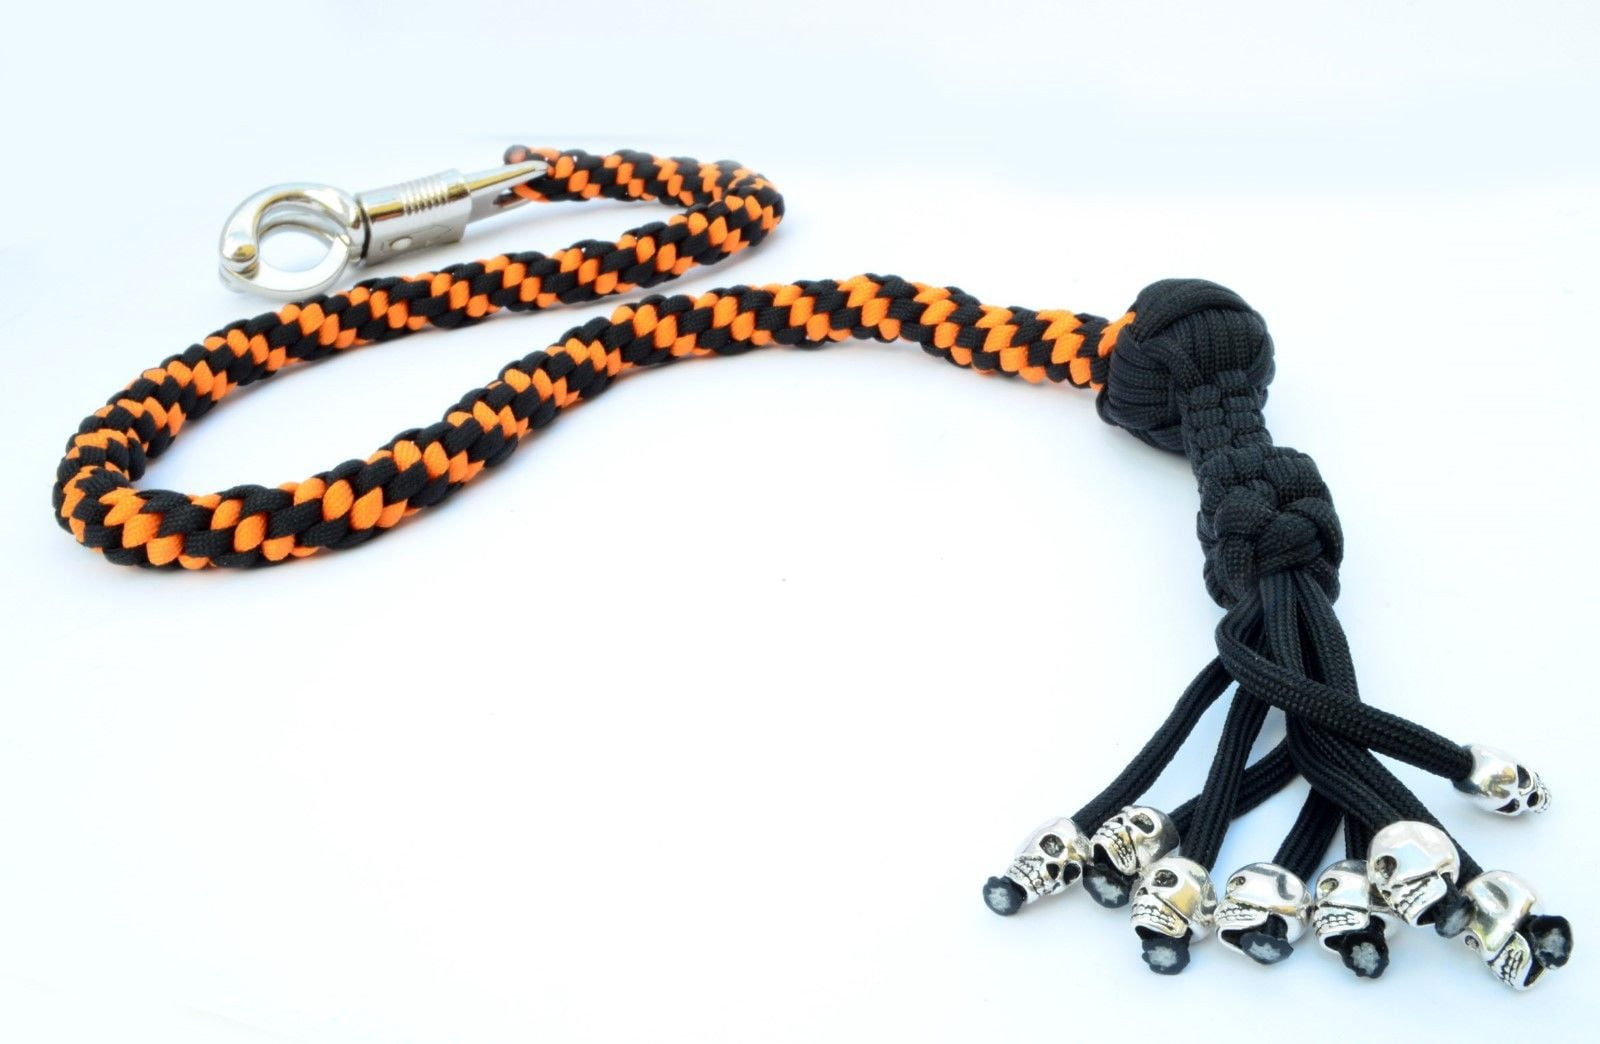 Accessoires Sleutelhangers & Keycords Sleutelhangers various ready made 550 paracord biker whips 